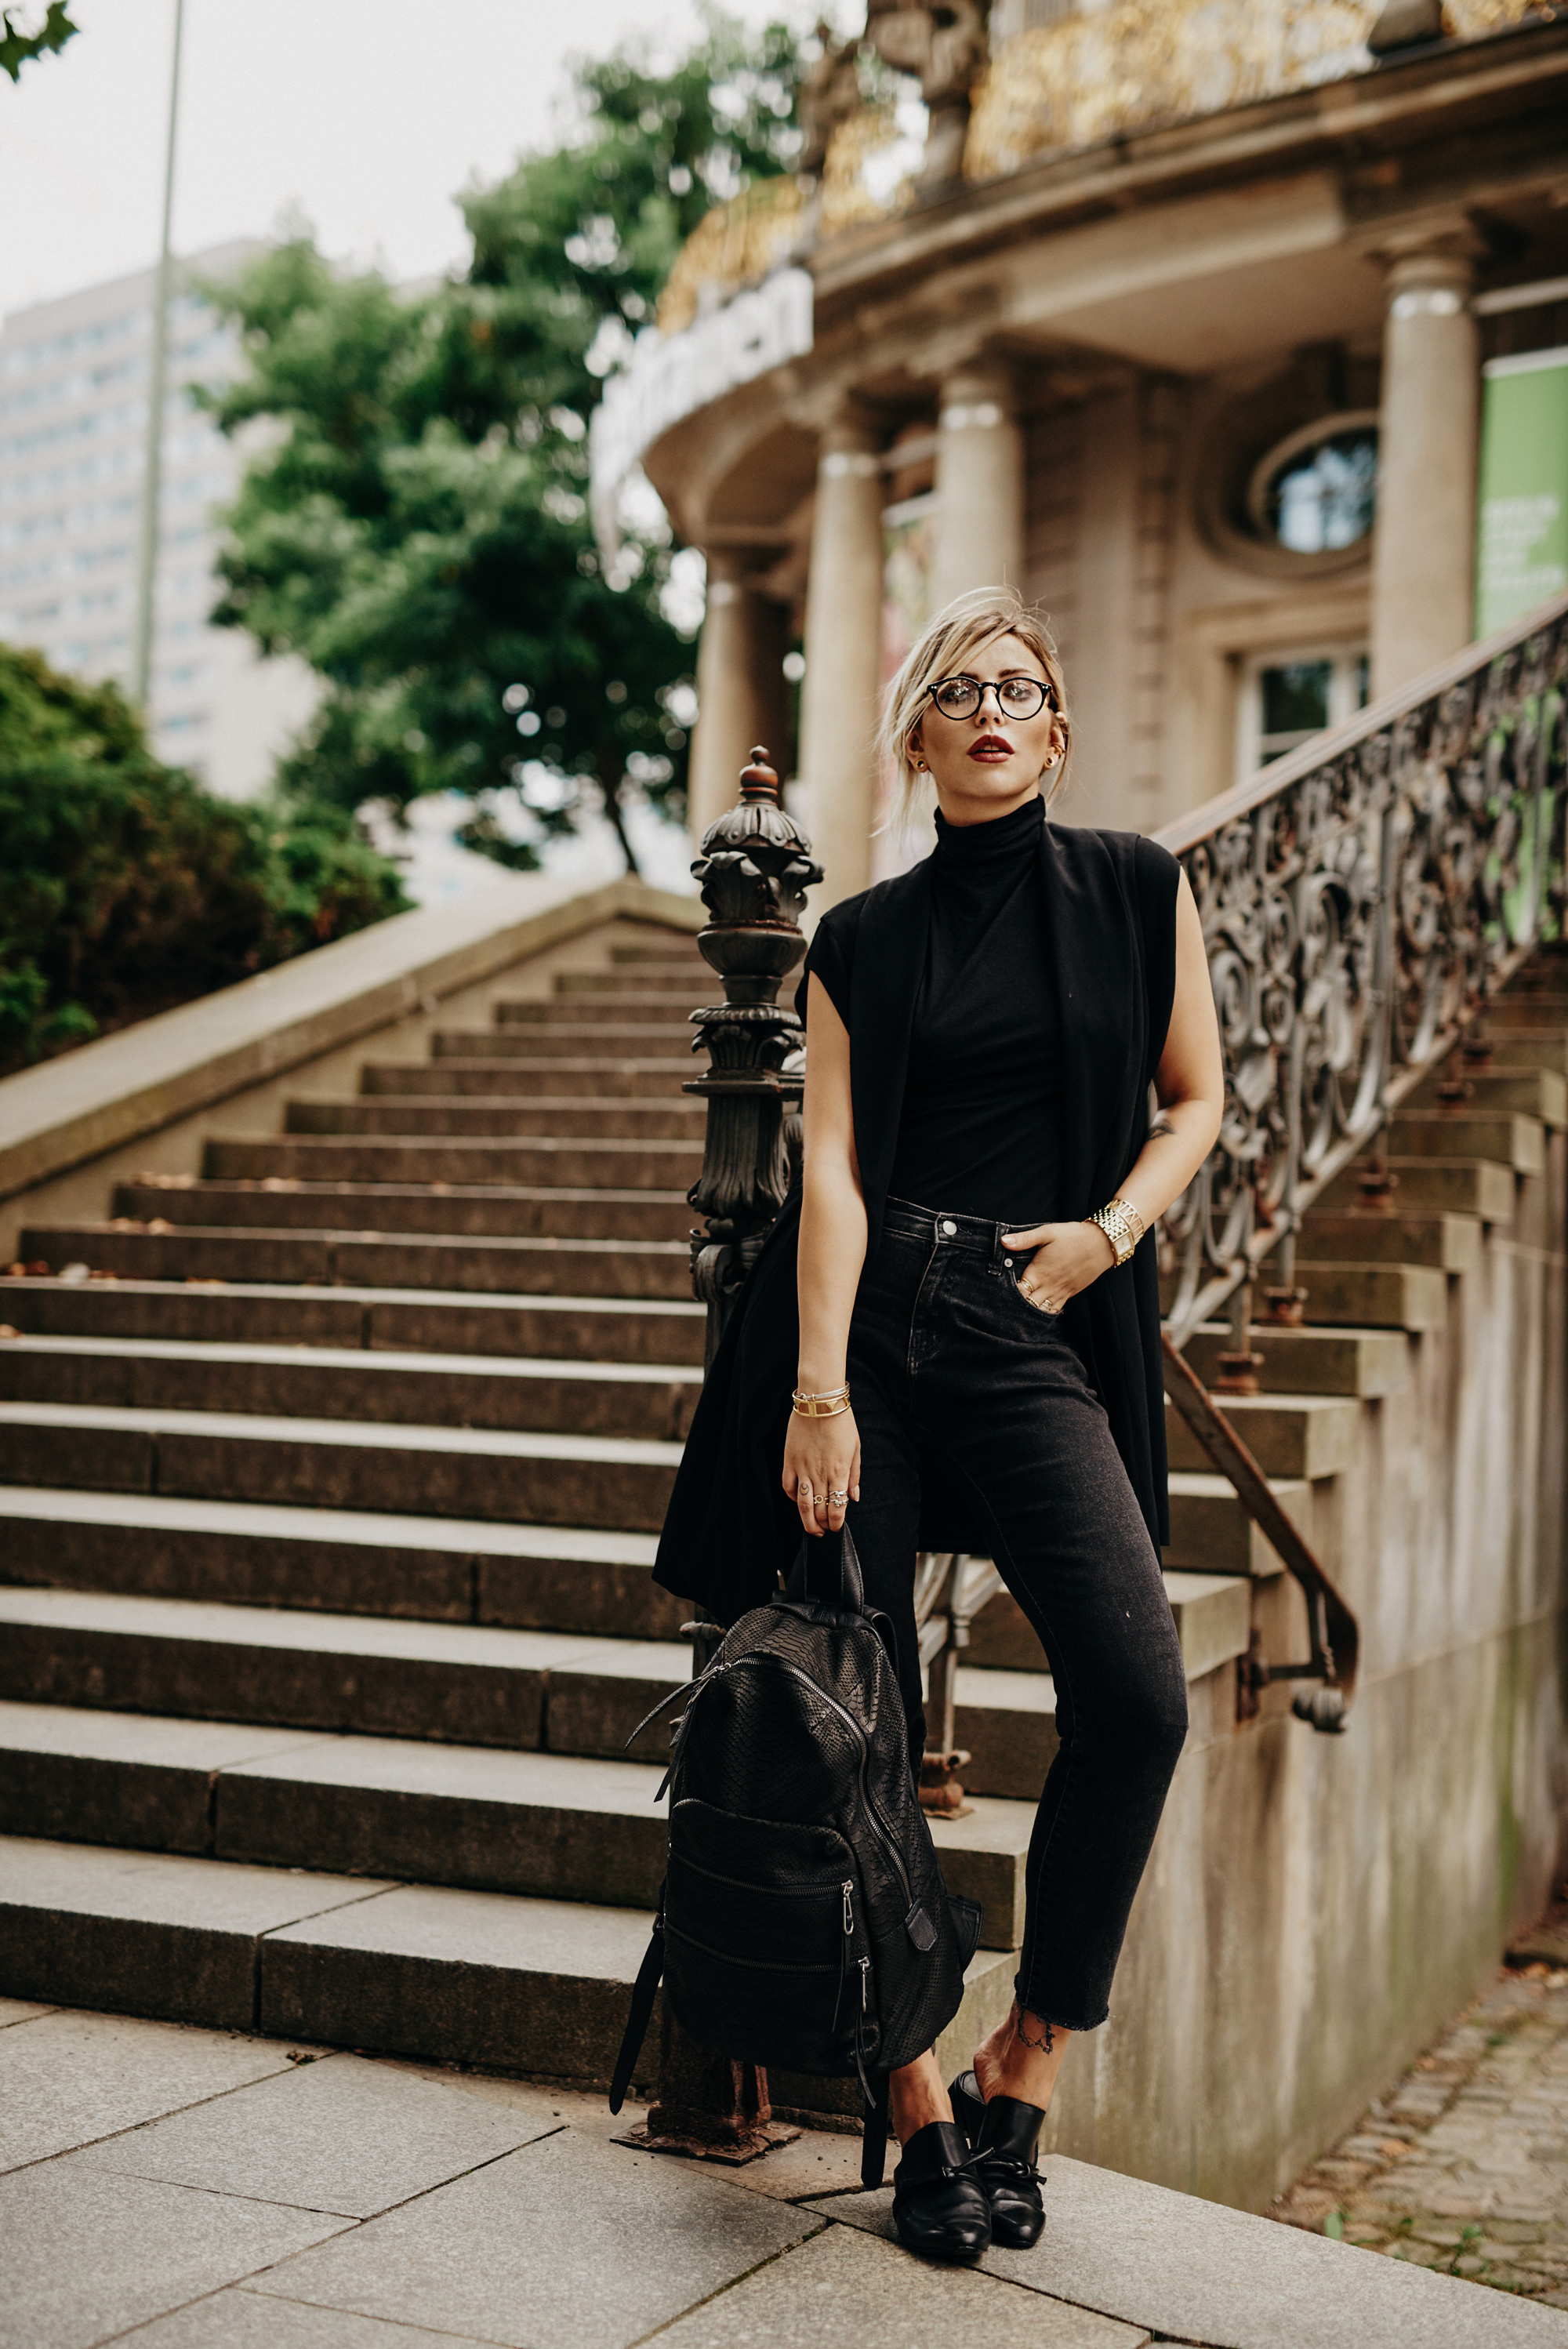 all black everything | outfit, fashion | style: edgy, black, dark, timeless, chic | backpack from Liebeskind, 3.1 Philip Lim Mules